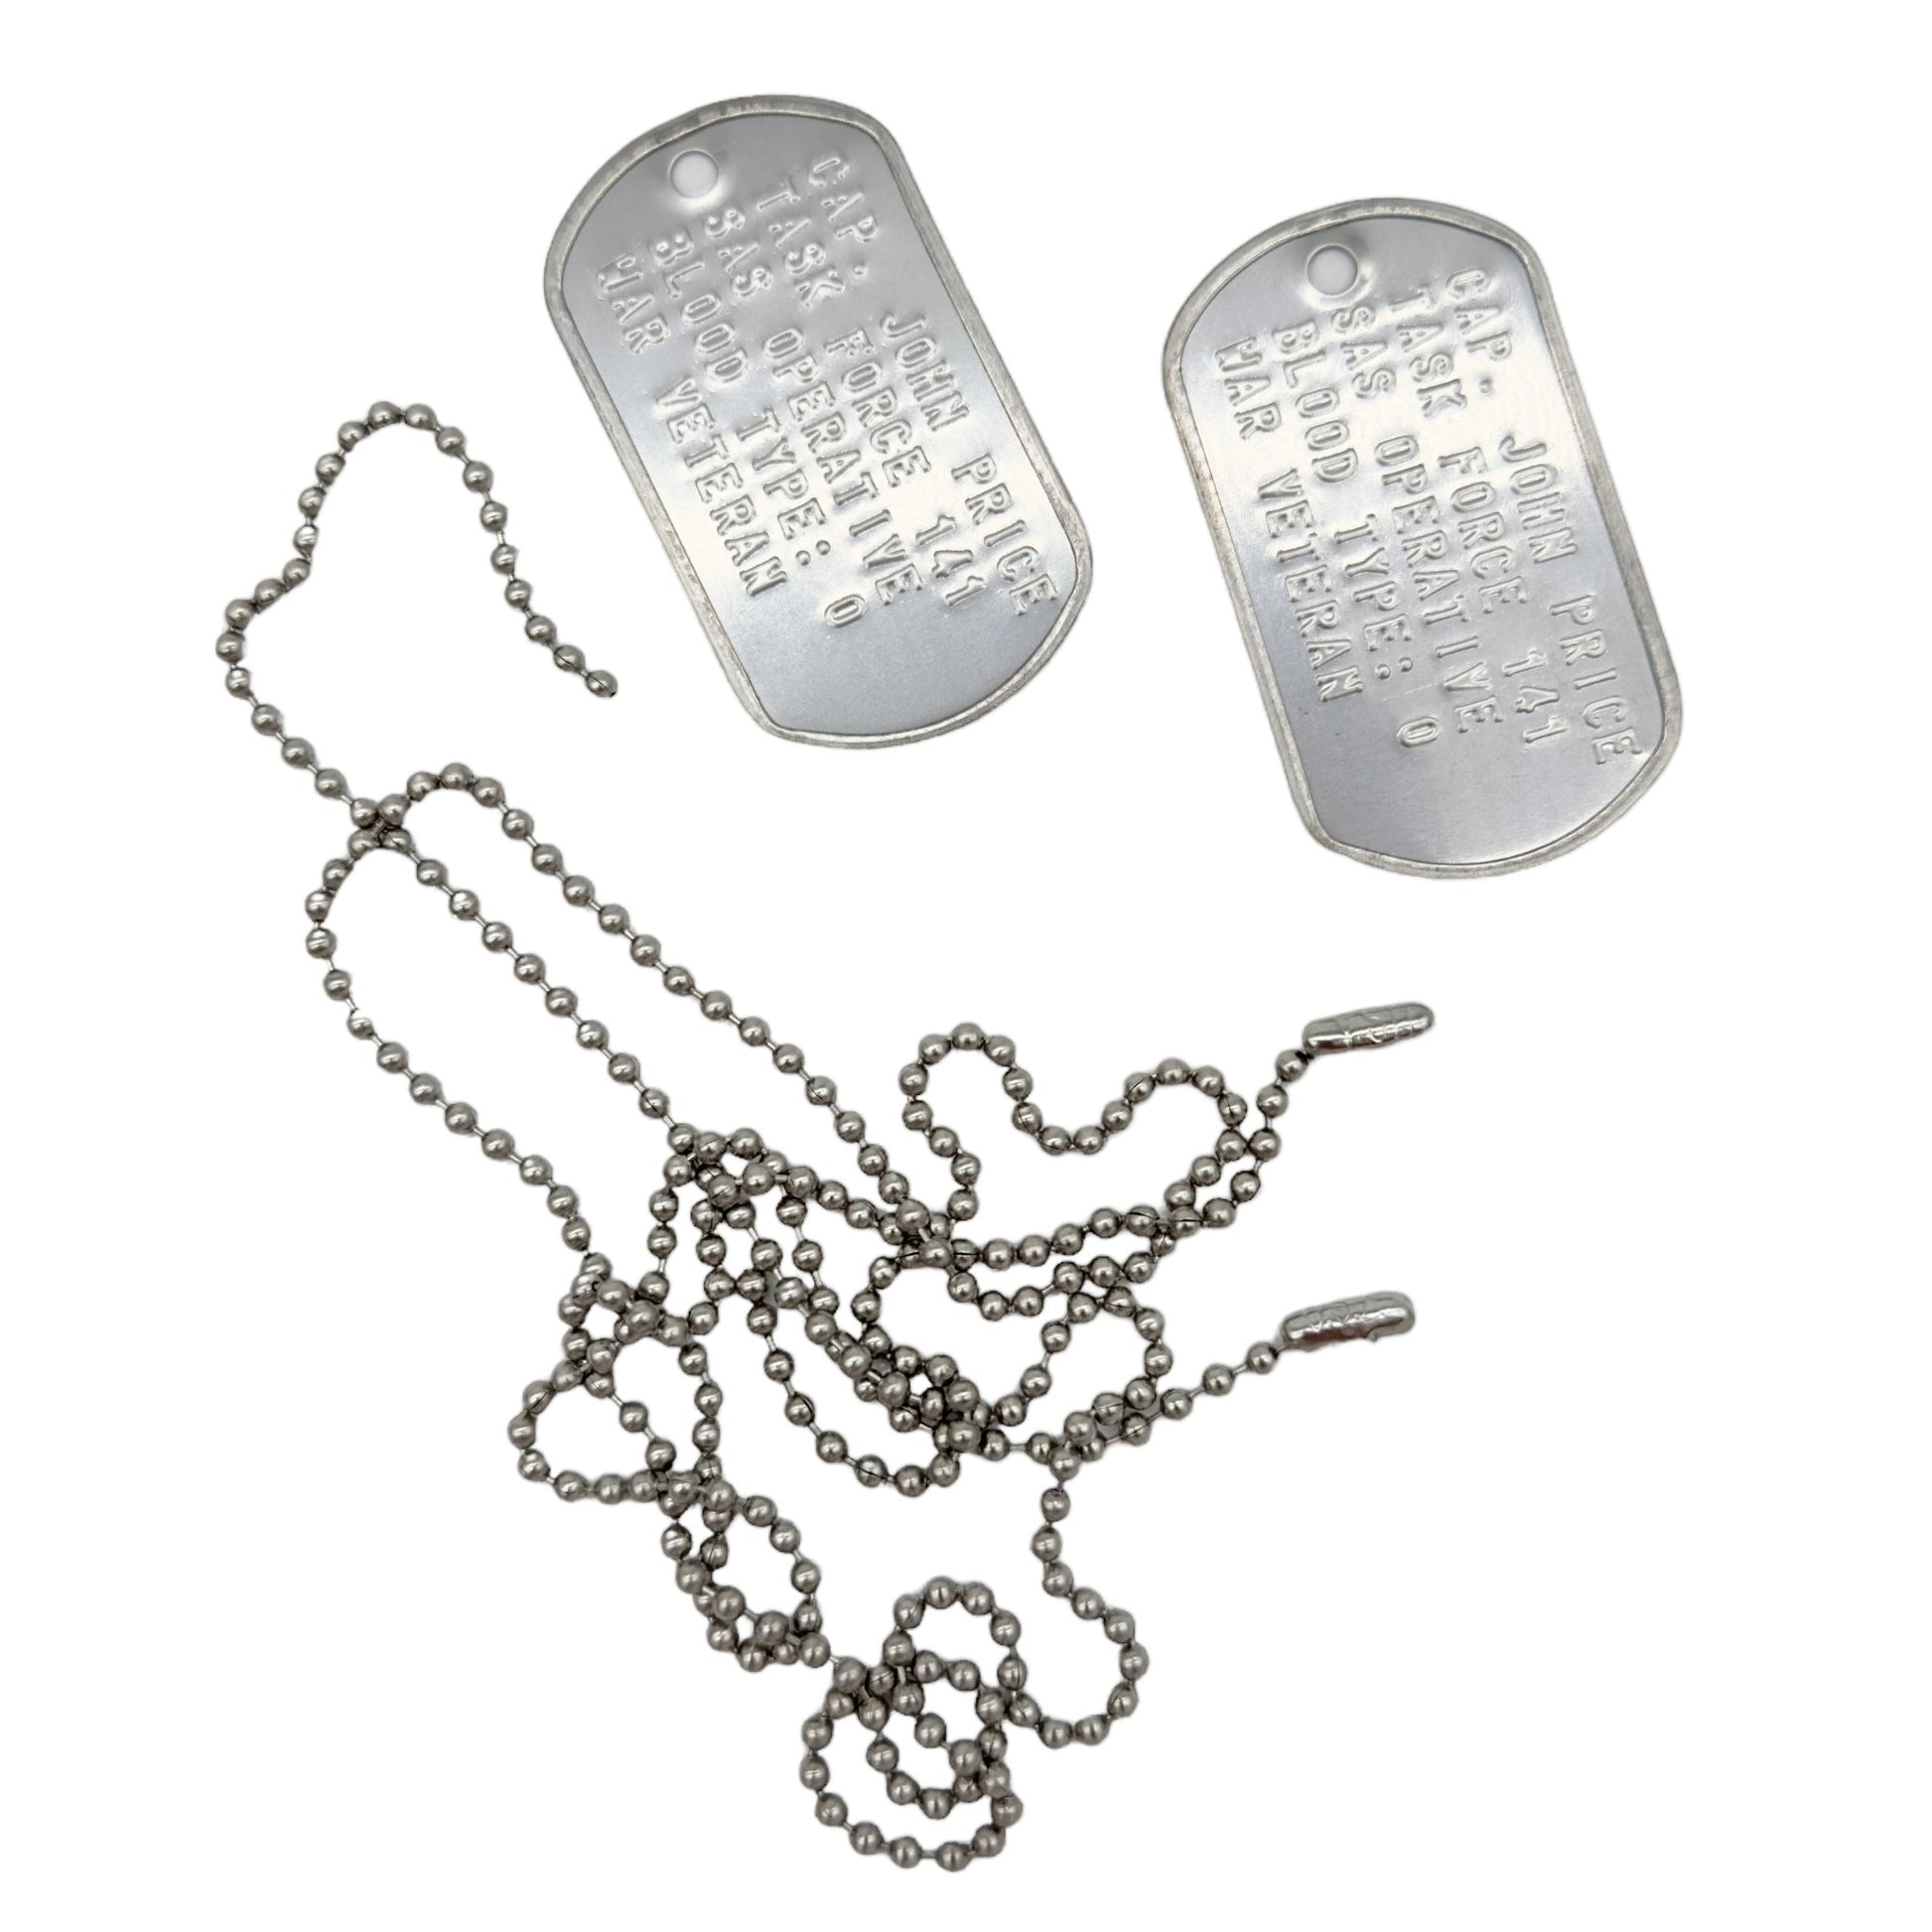 GI Dog Tag Chains - 2 Pieces (Pack of 50) - Fox Outdoor